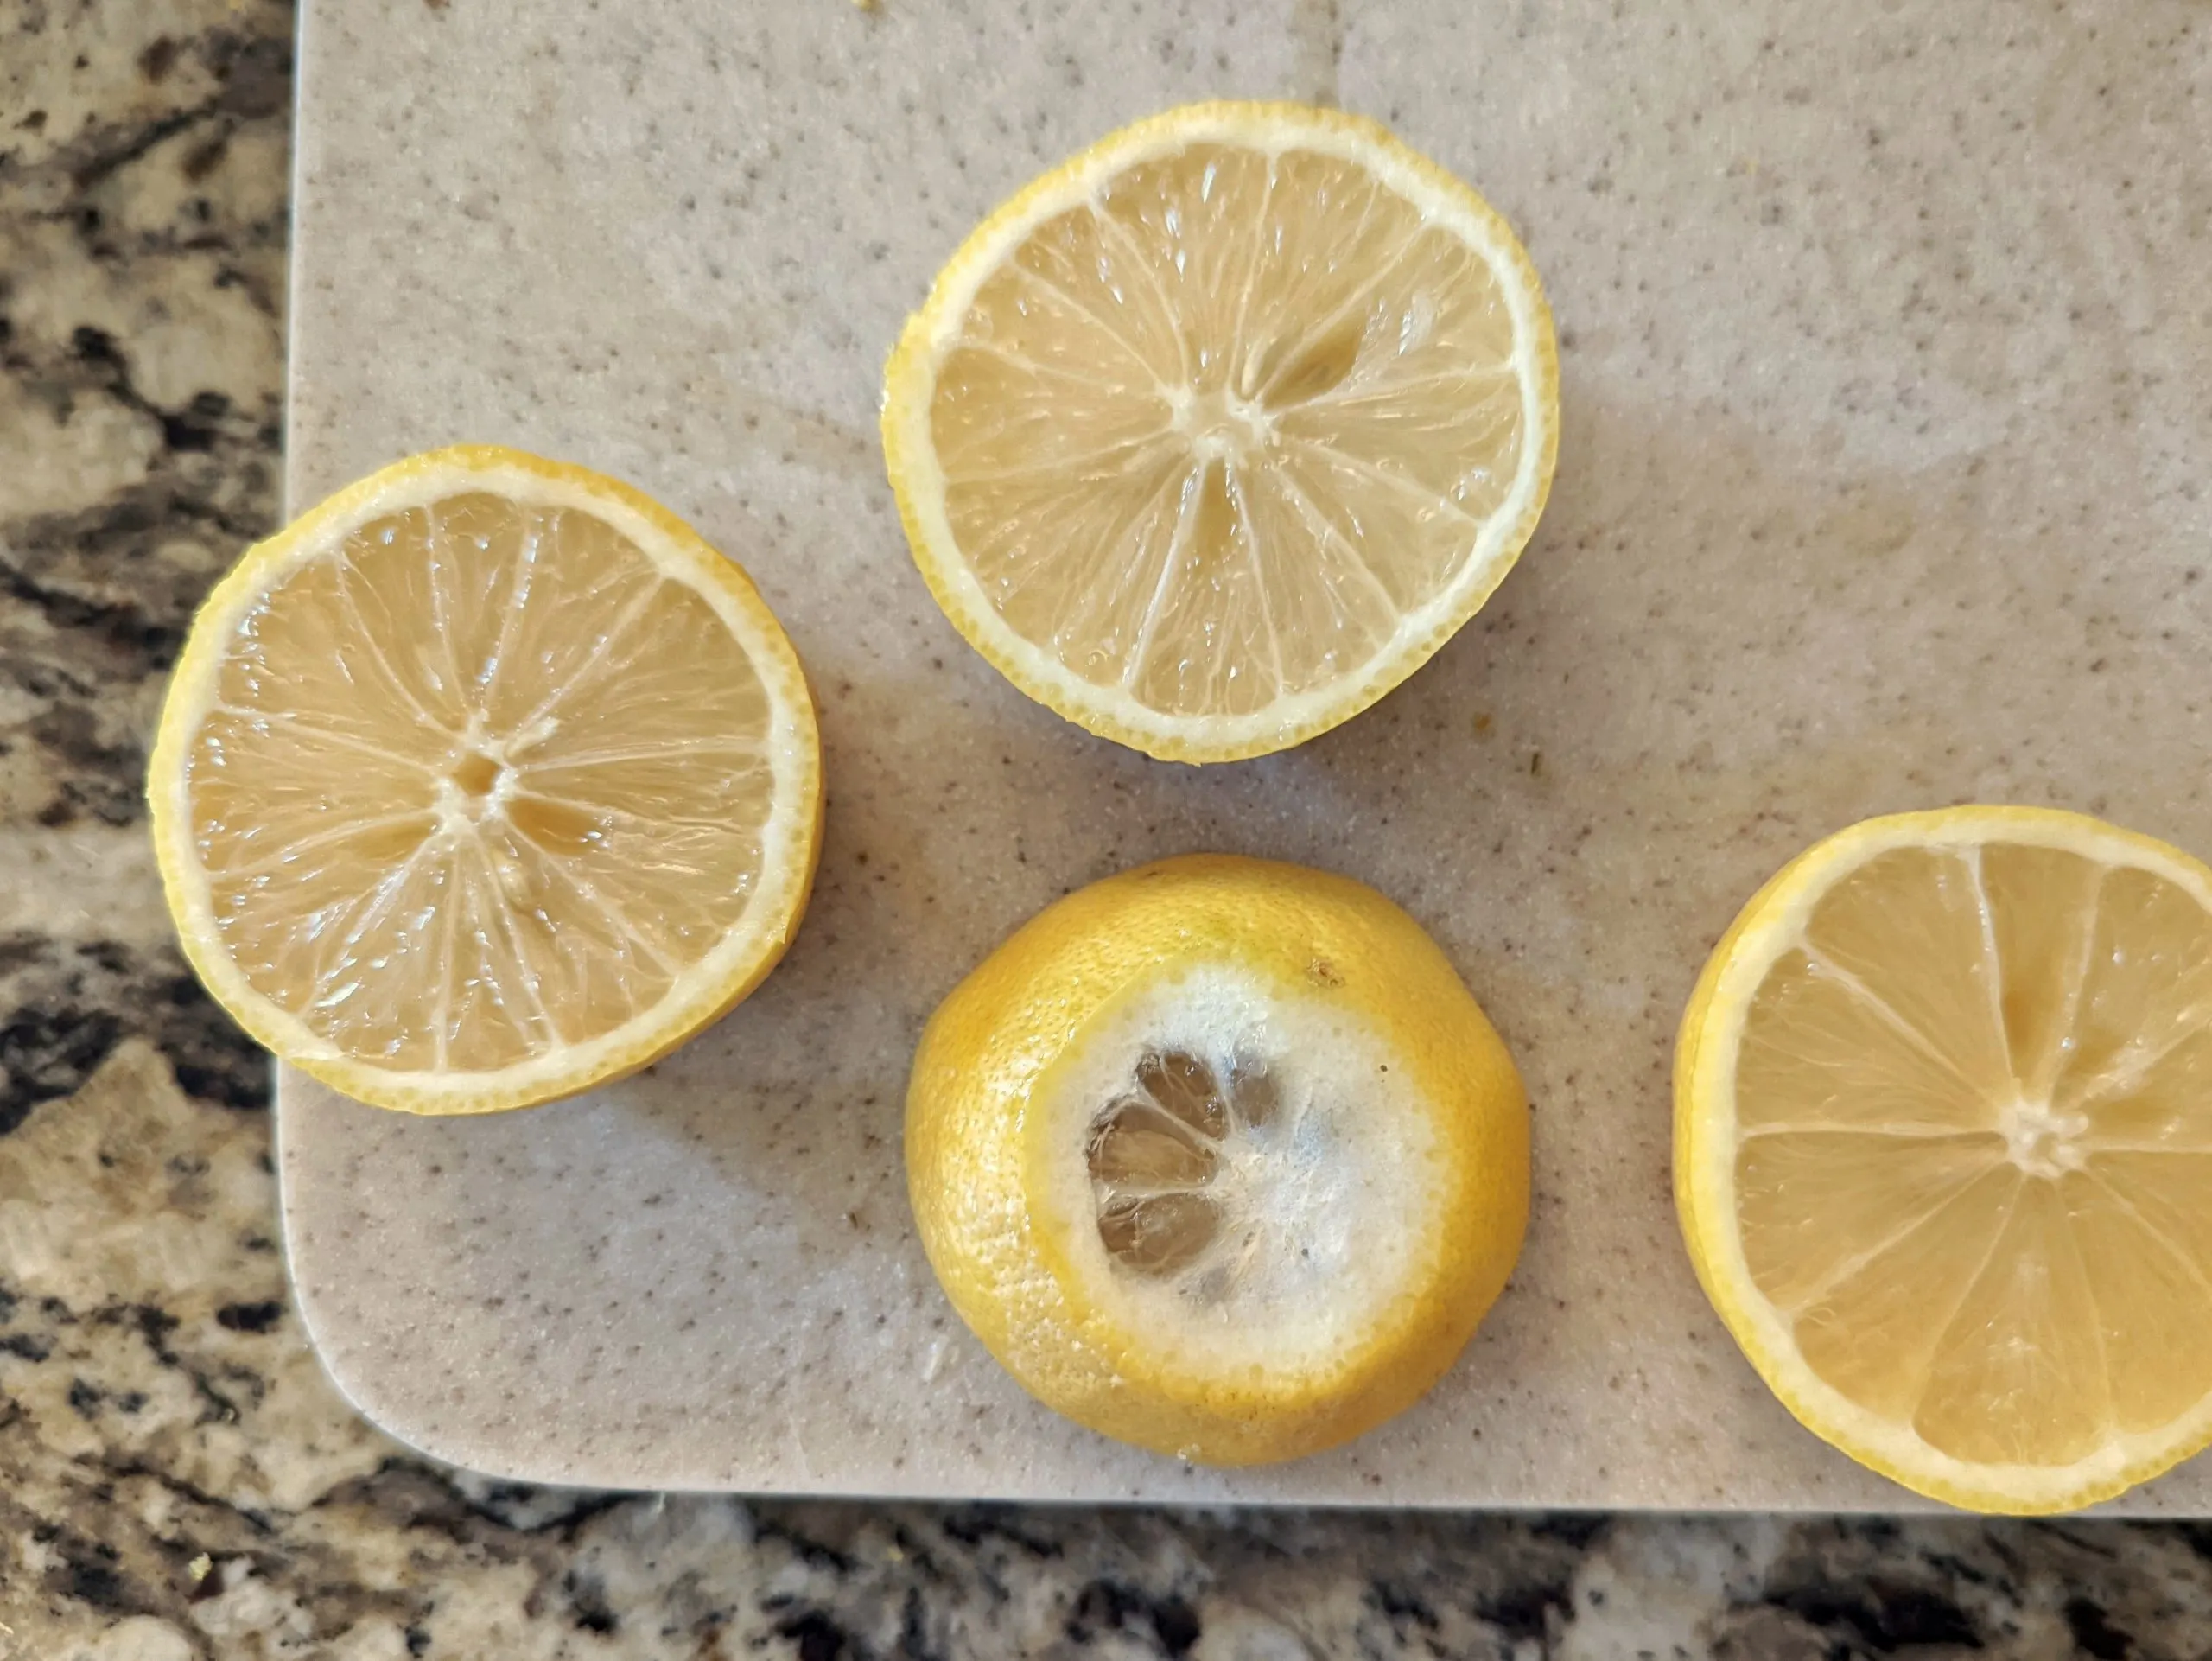 Cut the ends of the lemon off and then cut it in half.